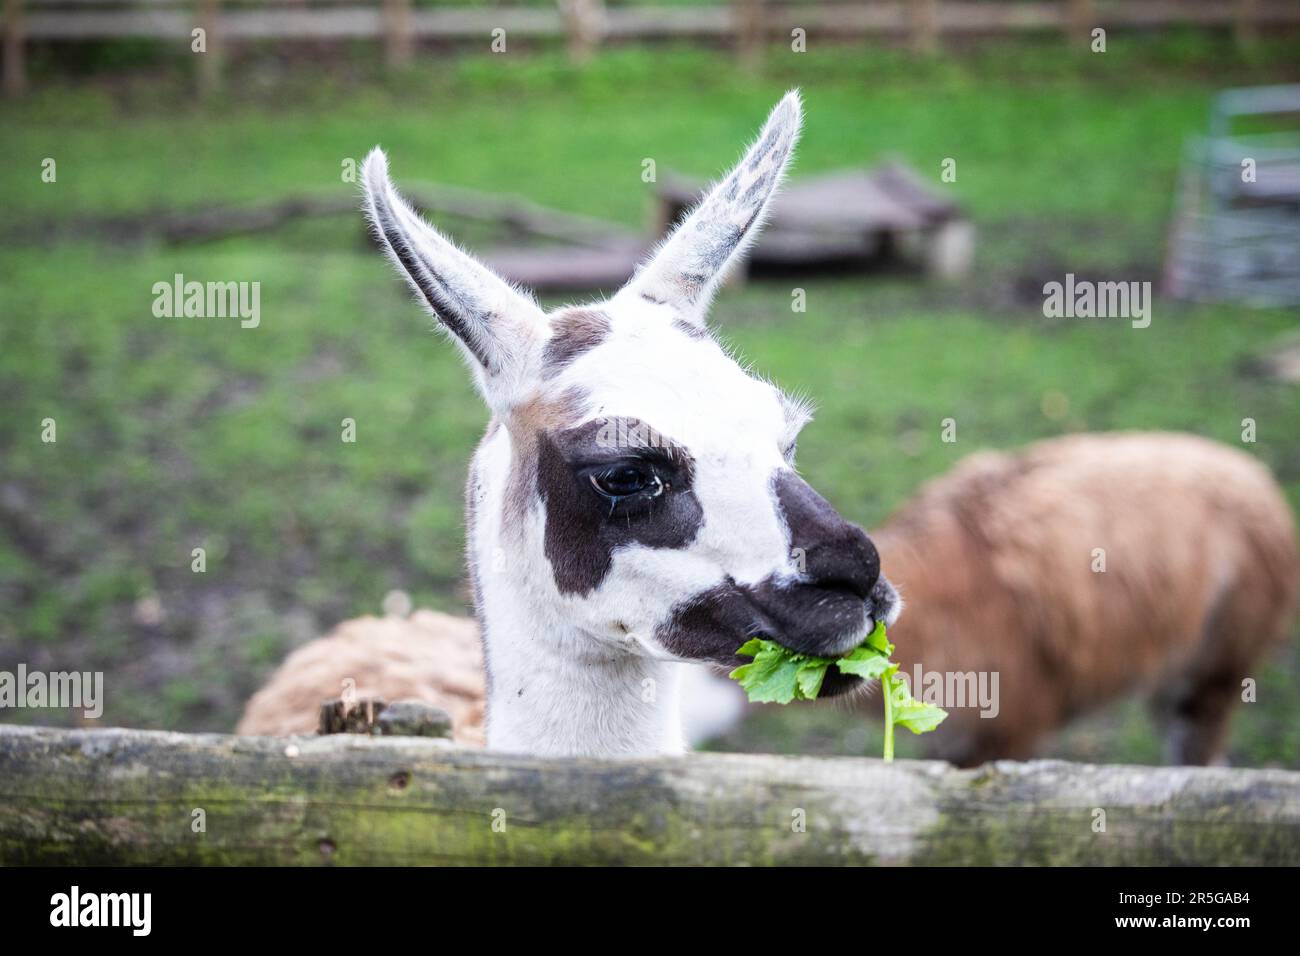 A young llama eats some fresh green leaves by a rustic wooden fence Stock Photo